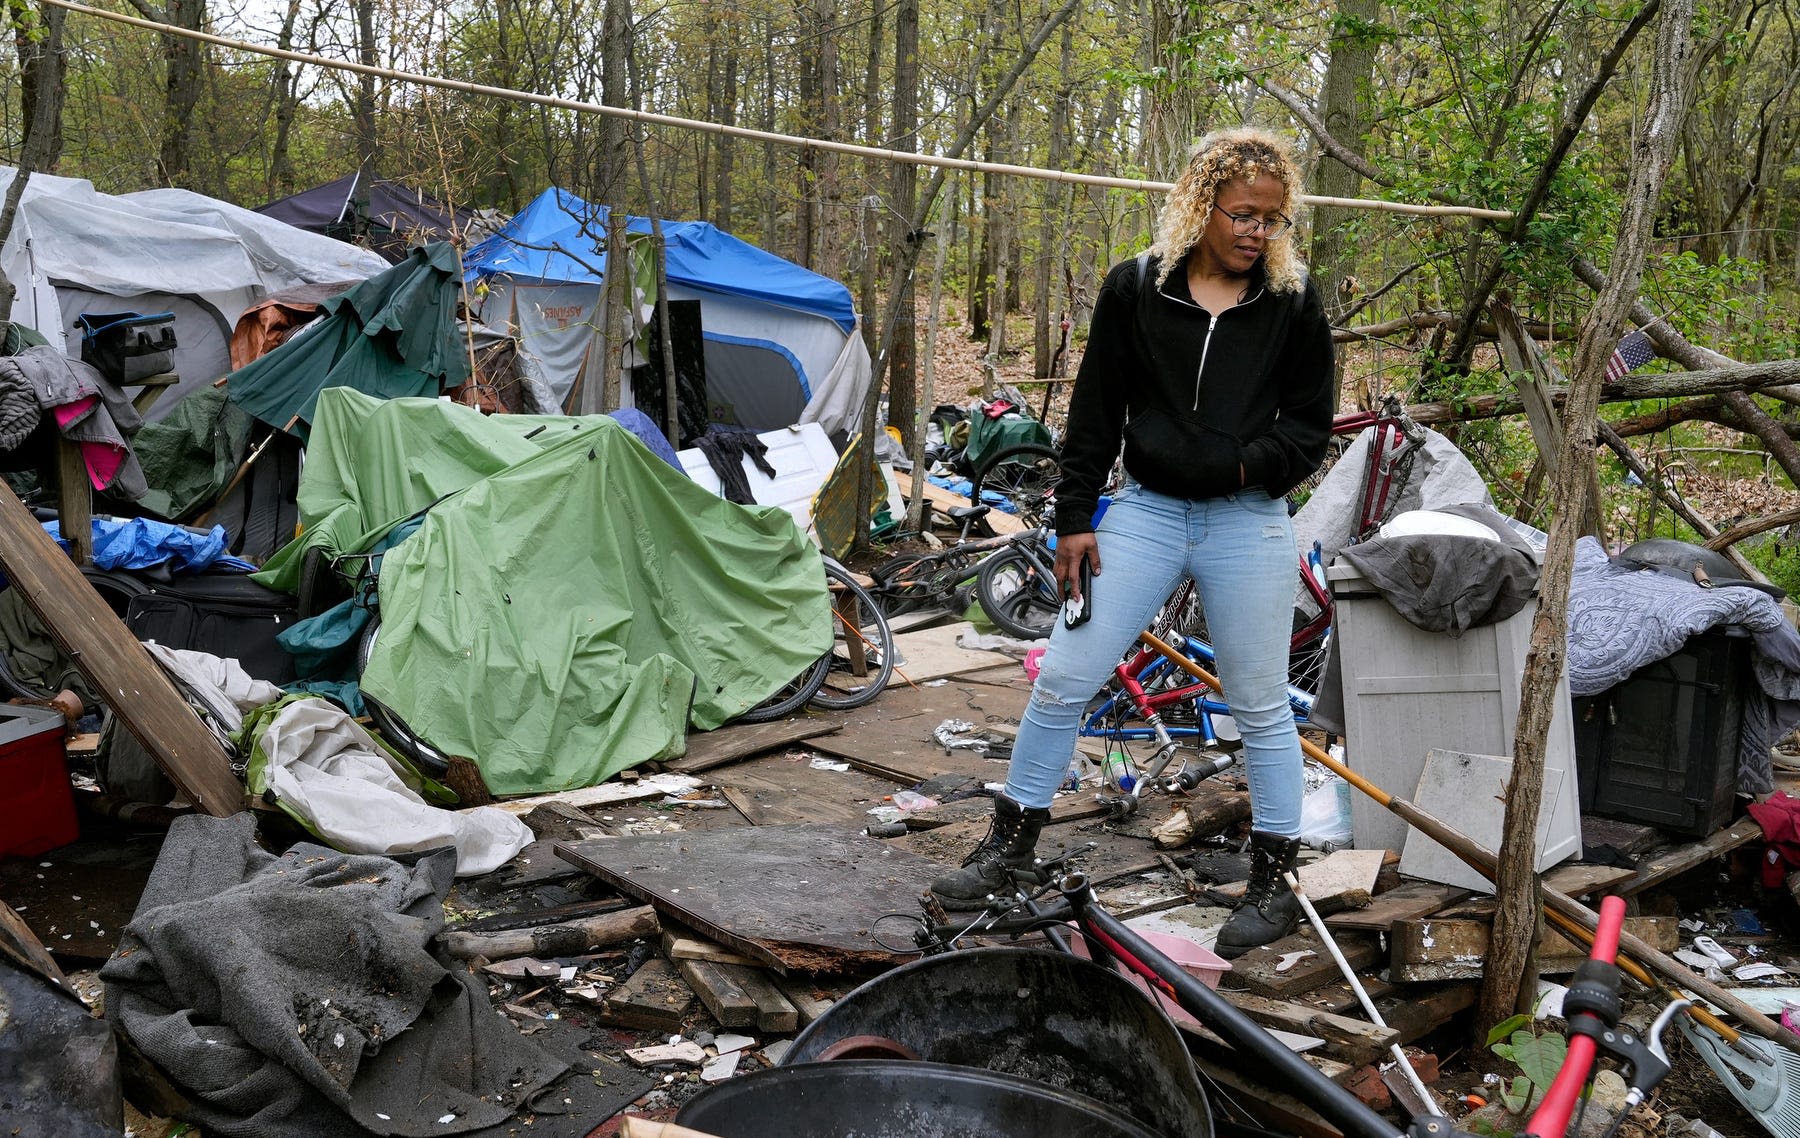 Providence police will force two homeless encampments out. Where will they go?